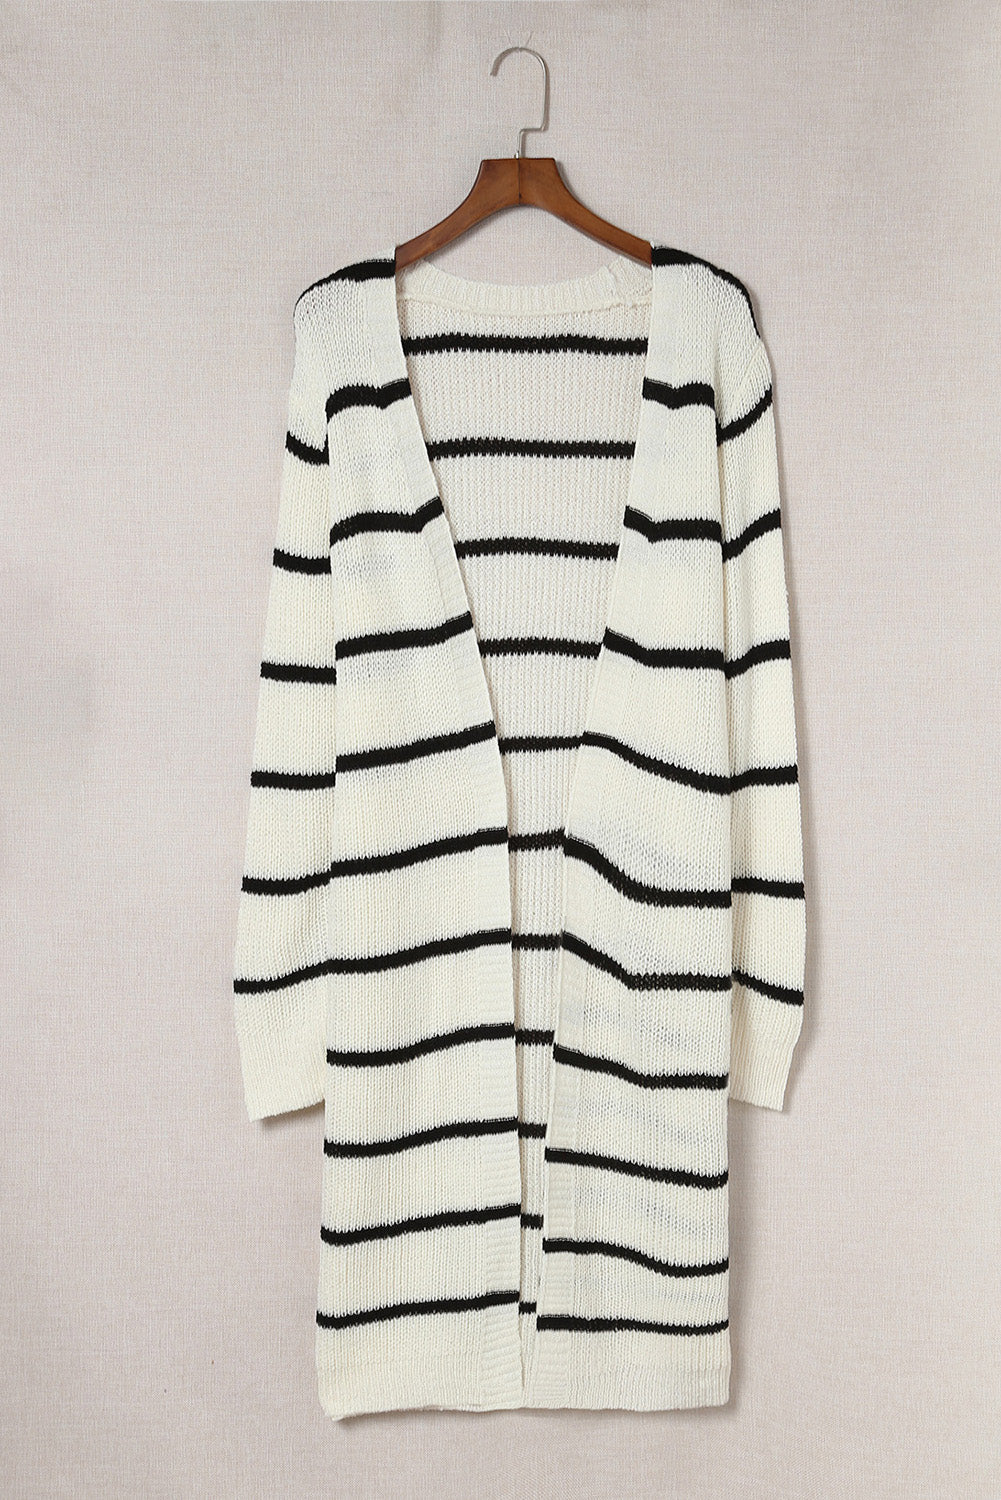 Striped Open Front Rib-Knit Duster Cardigan - Cicis Boutique